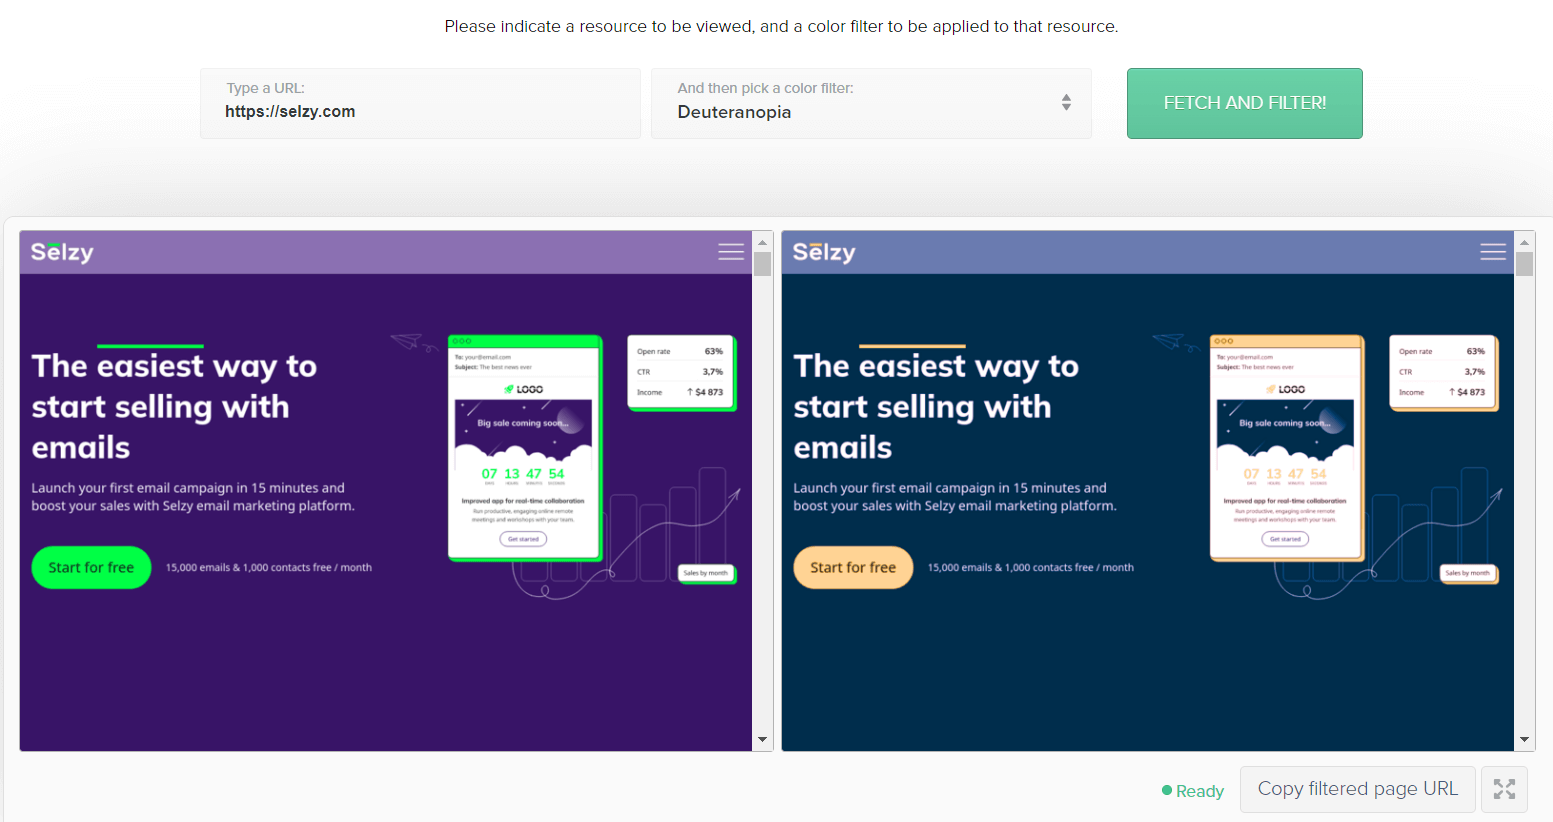 Colorblind filter for websites shows what Selzy’s main page looks like for people with deuteranopia: green turns orange, purple is now blue, but the contrast is still high